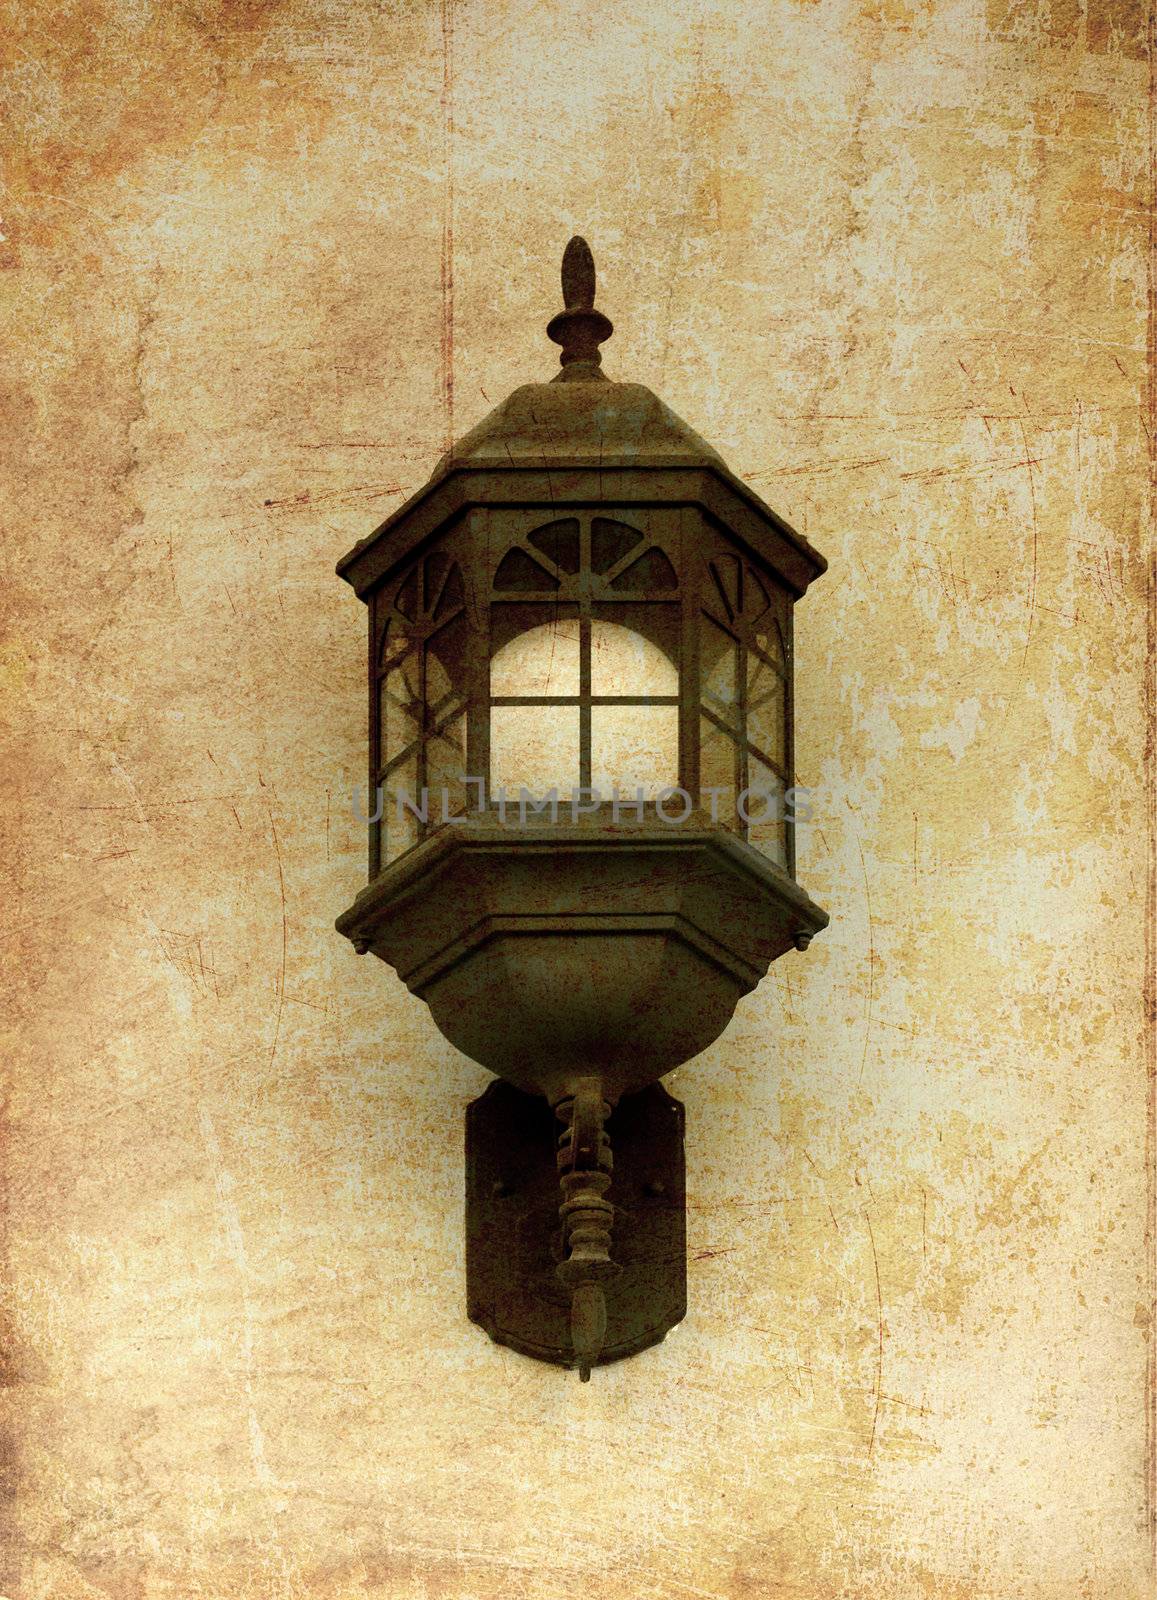 Vintage street lamp, photo in old image style